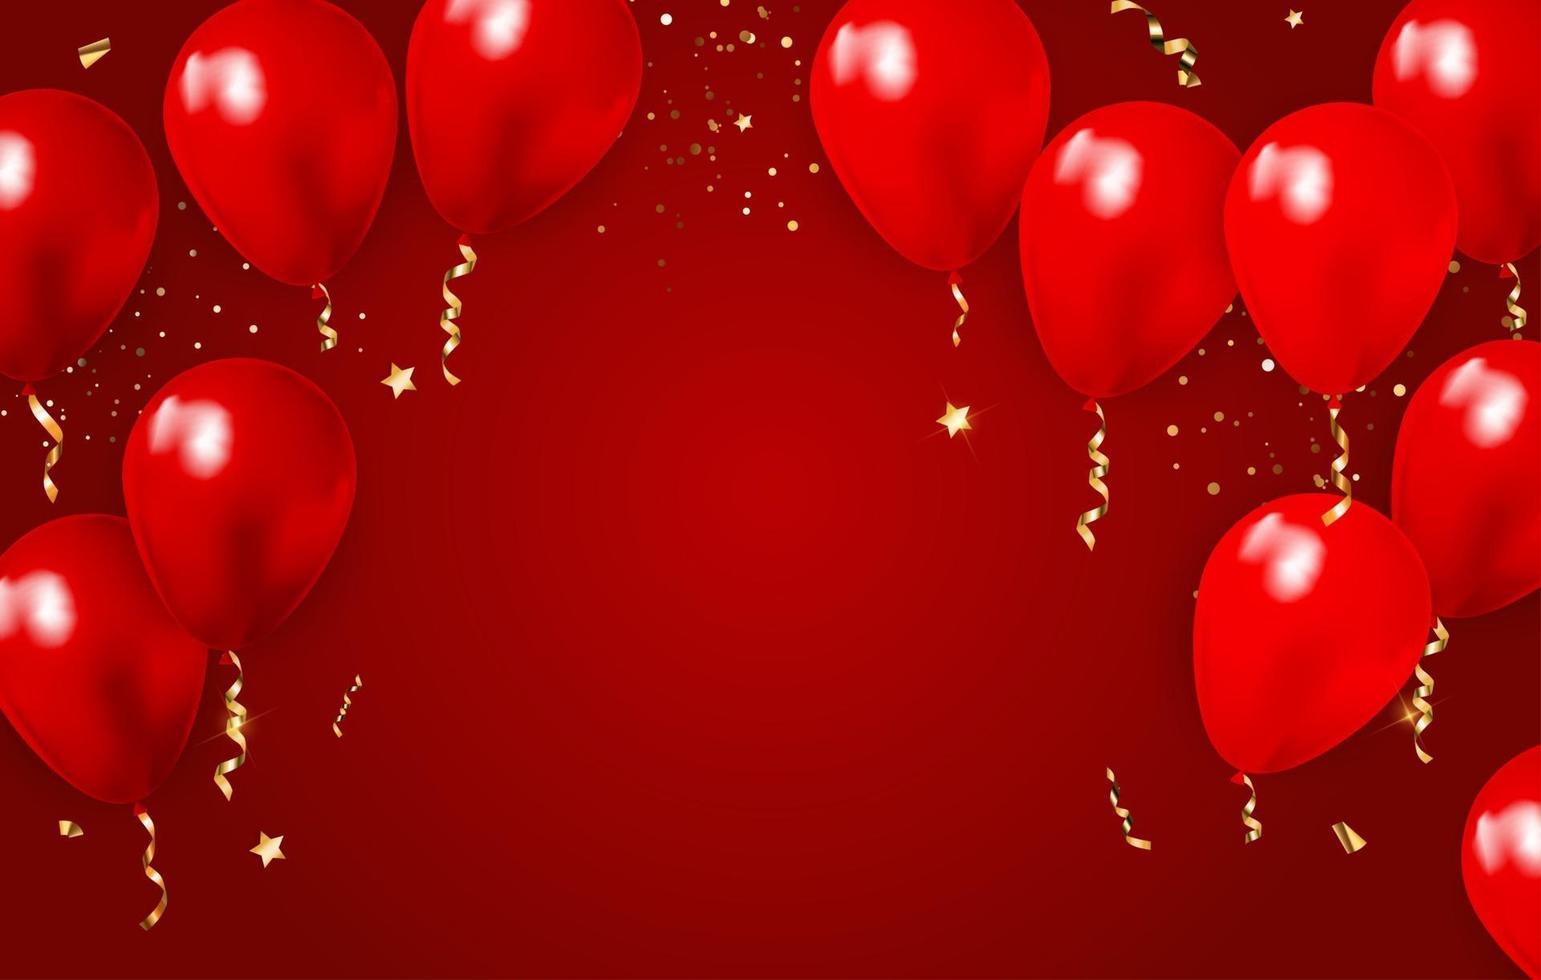 Abstract Background with Realistic Red Balloons confetti vector